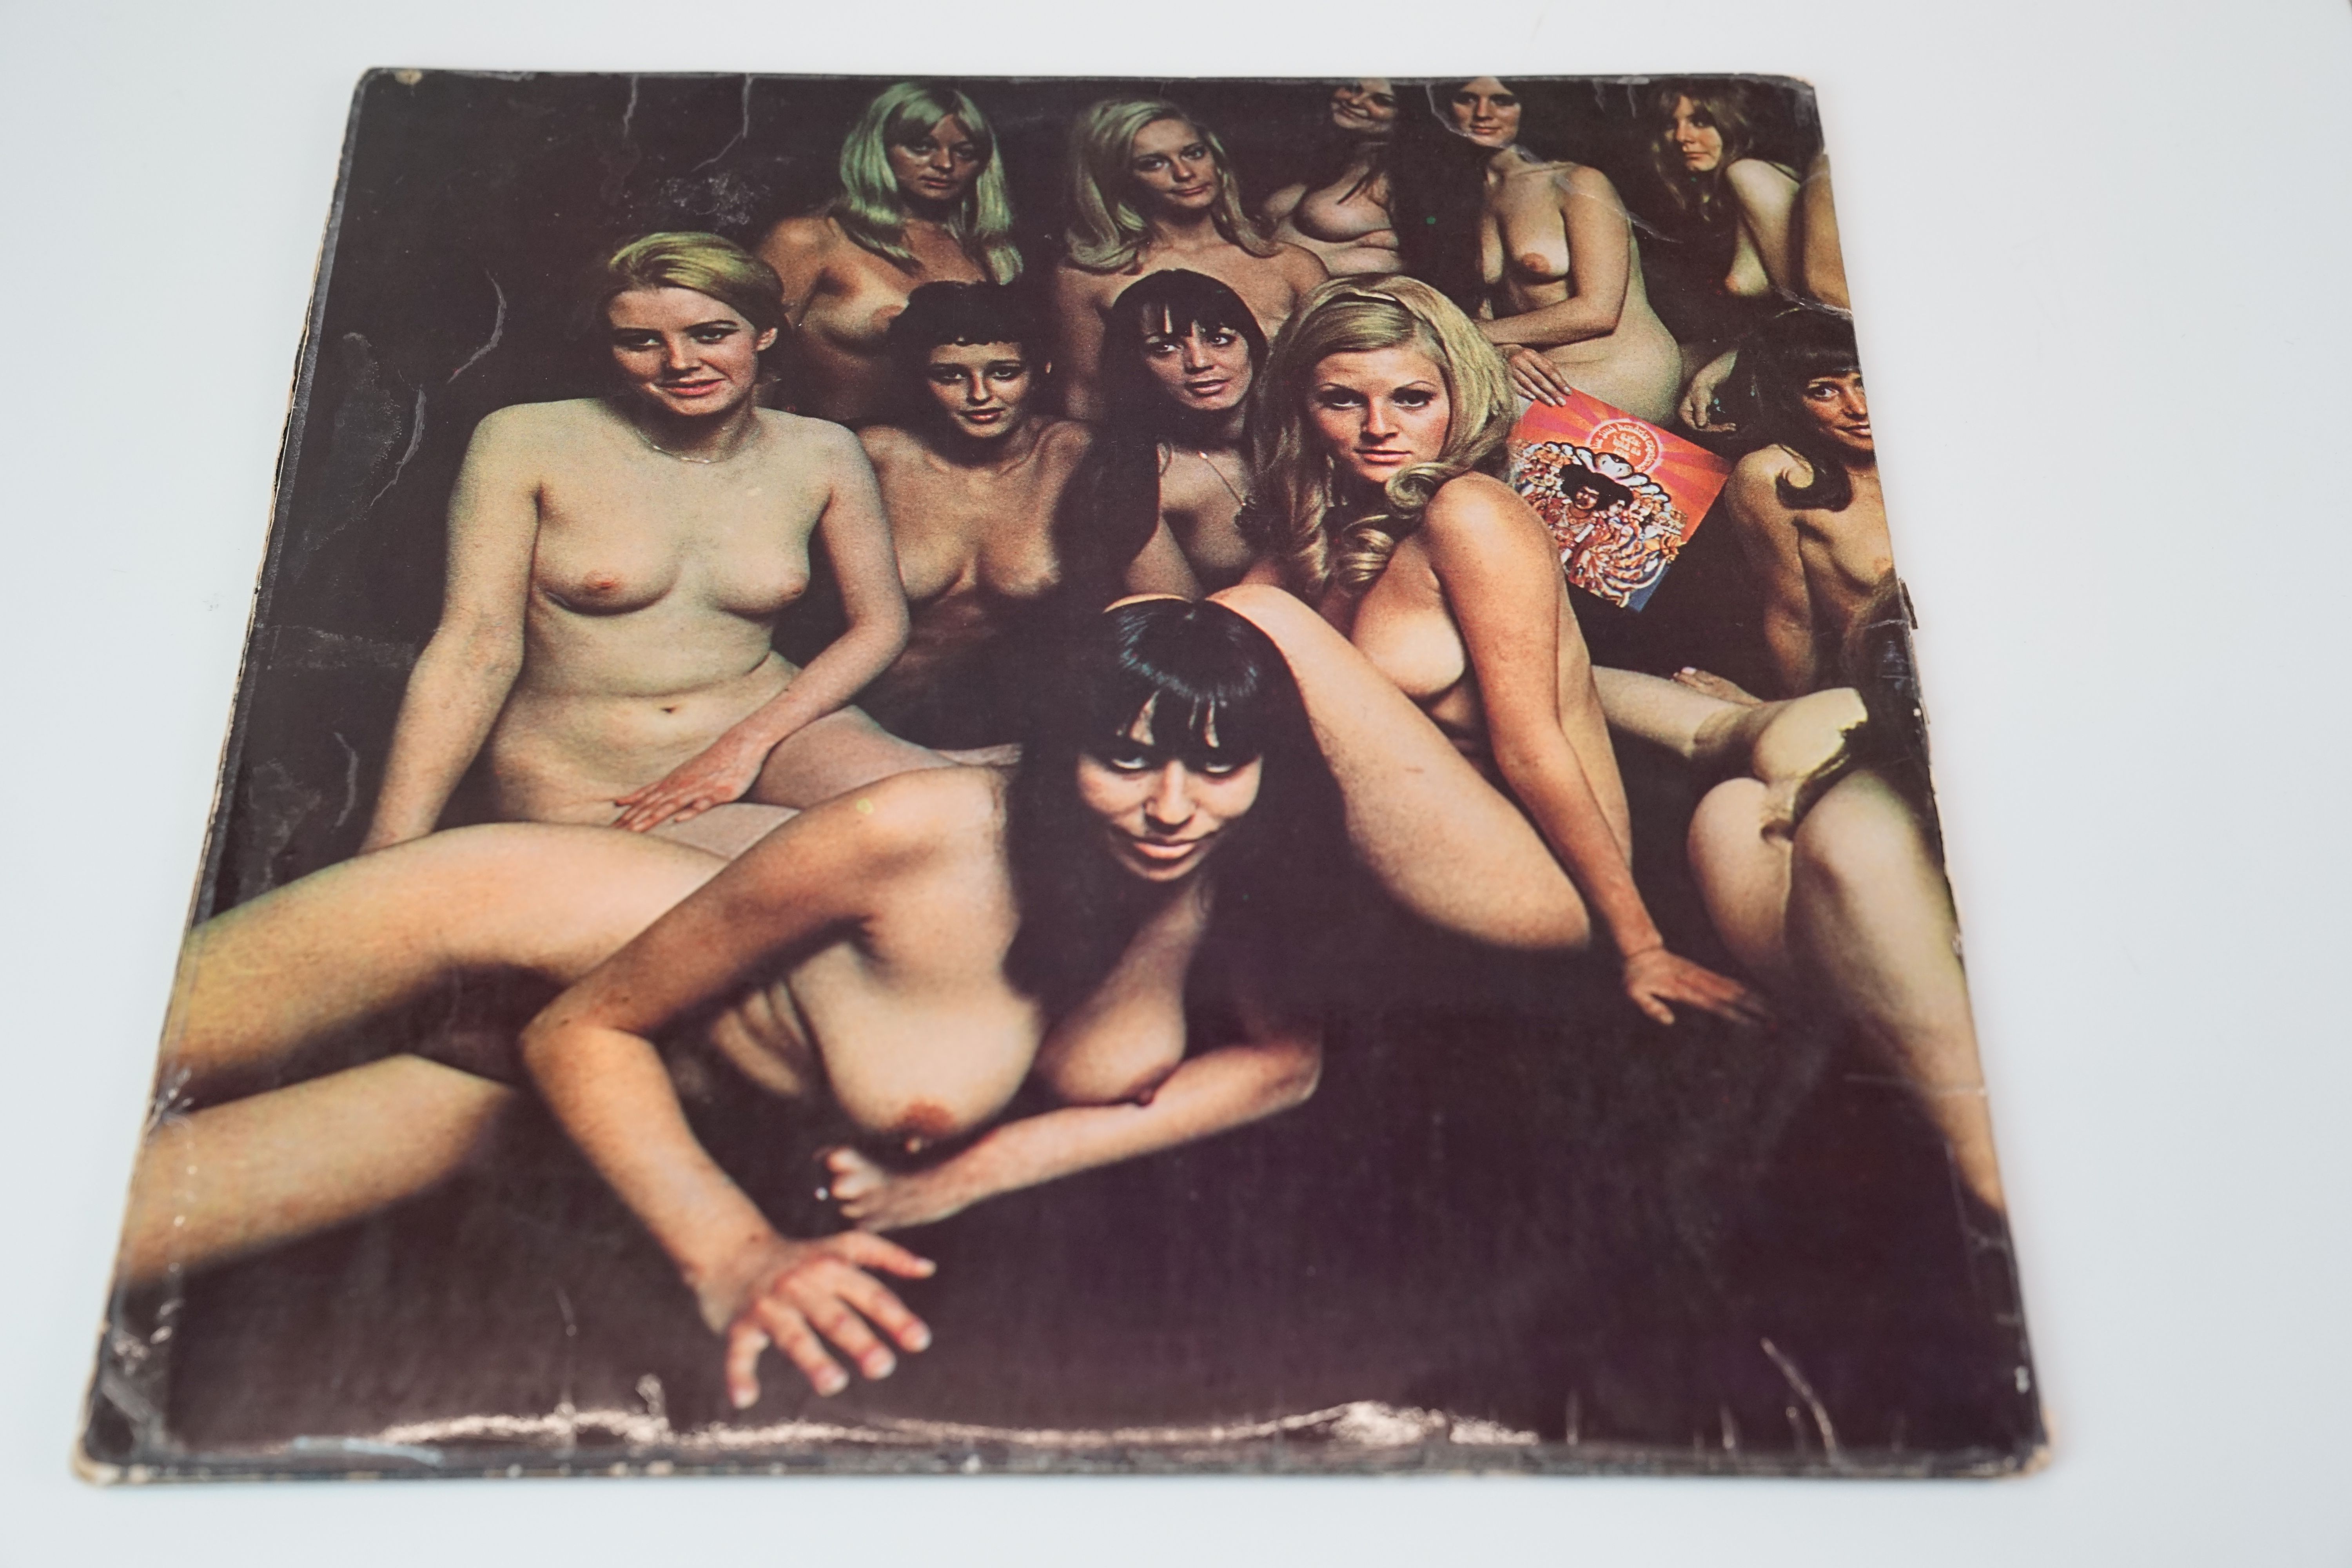 Vinyl - Jimi Hendrix Electric Ladyland LP on Track 613008/9 with inner with blue lettering with Jimi - Image 2 of 12